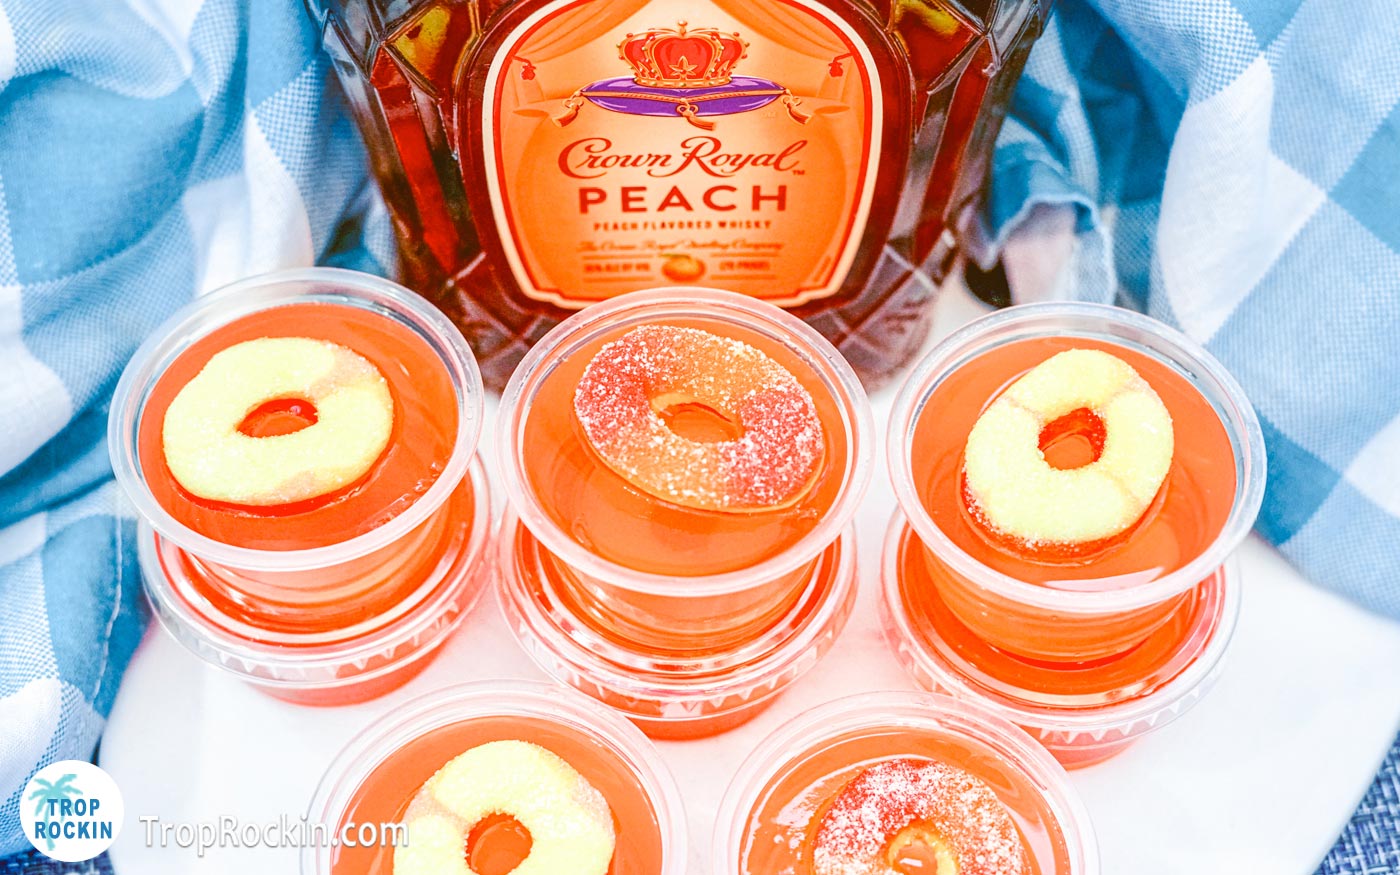 Crown peach jello shots with peach rings for garnish on top with a bottle of Crown Royal Peach Whisky in the background.